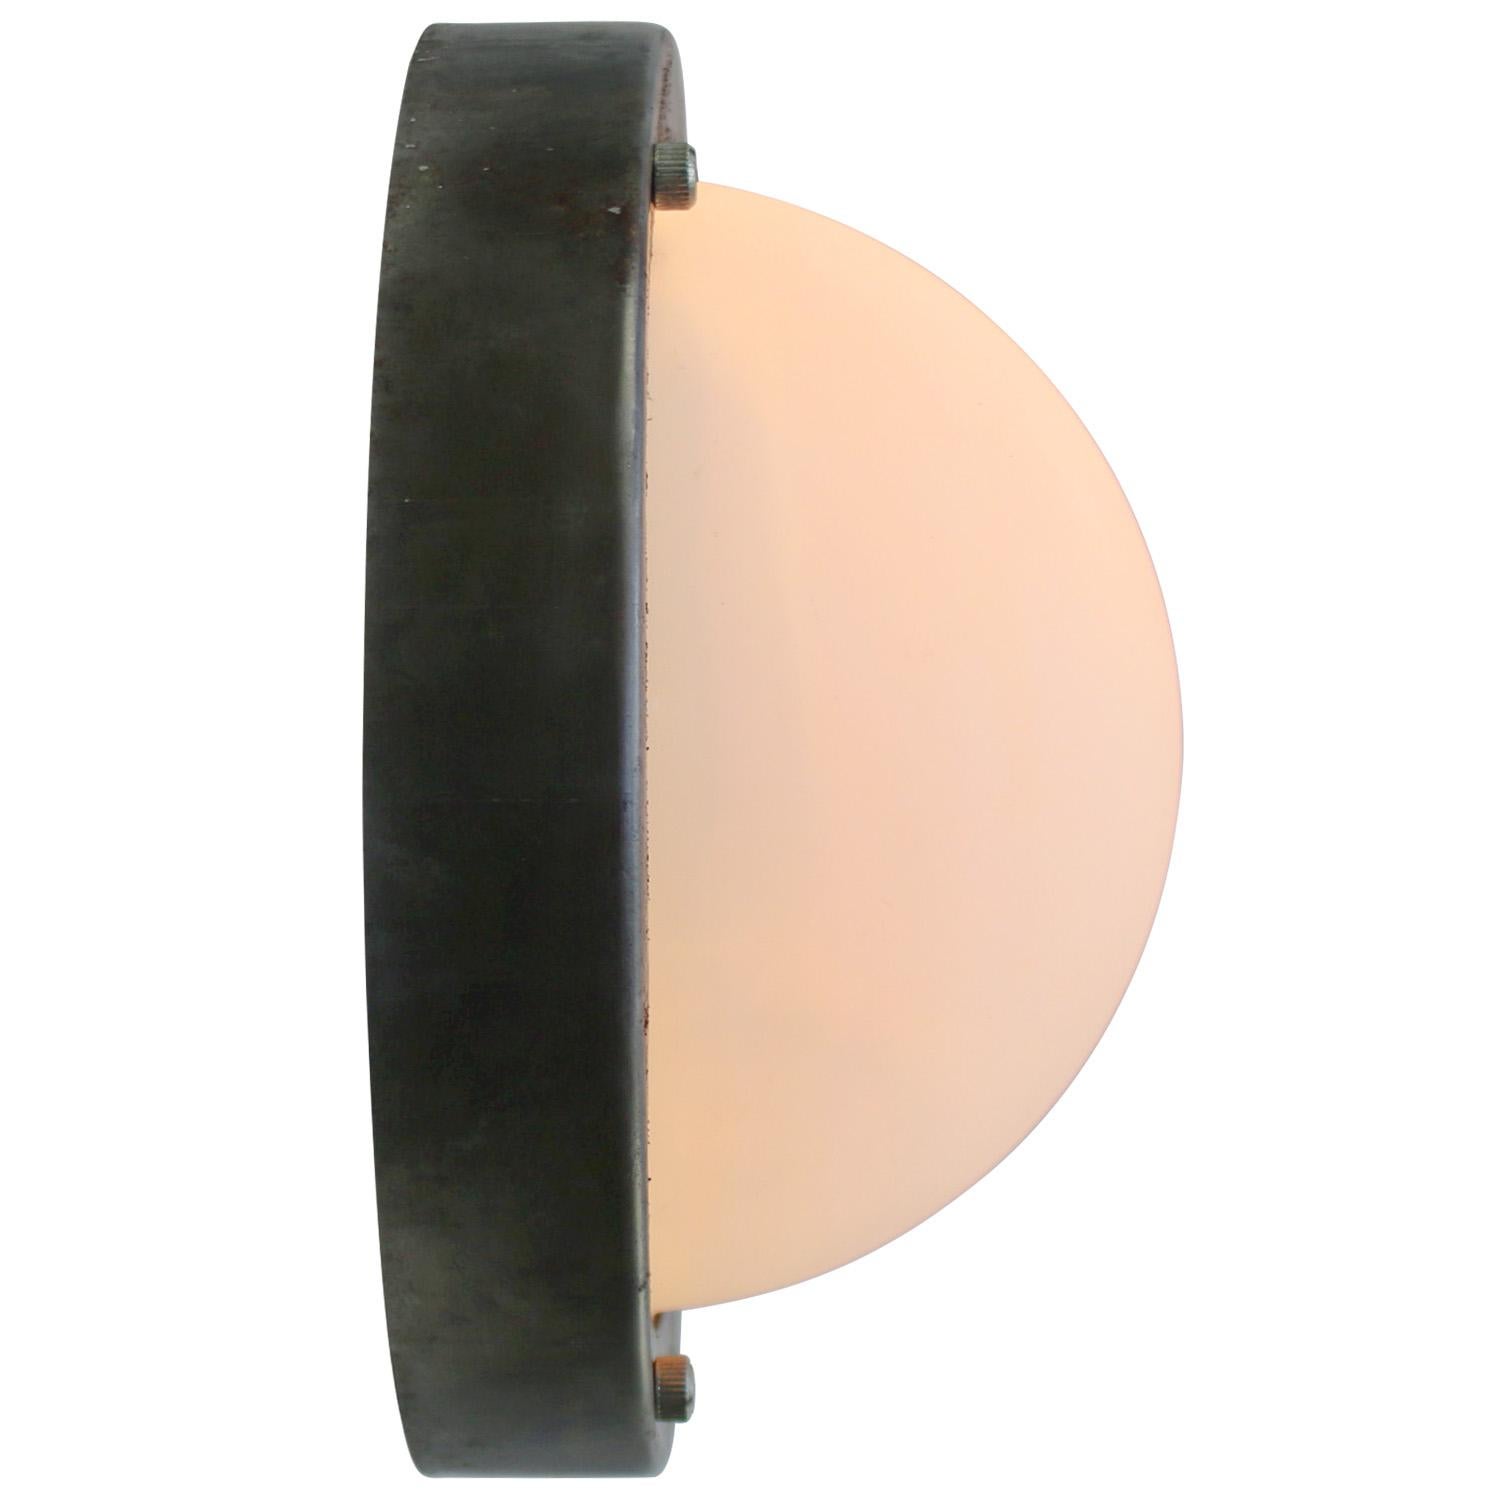 Industrial wall / ceiling lamp
Metal back with mat frosted glass.

2x E26 / E27

Weight 1.70 kg / 3.7 lb

Priced per individual item. All lamps have been made suitable by international standards for incandescent light bulbs, energy-efficient and LED